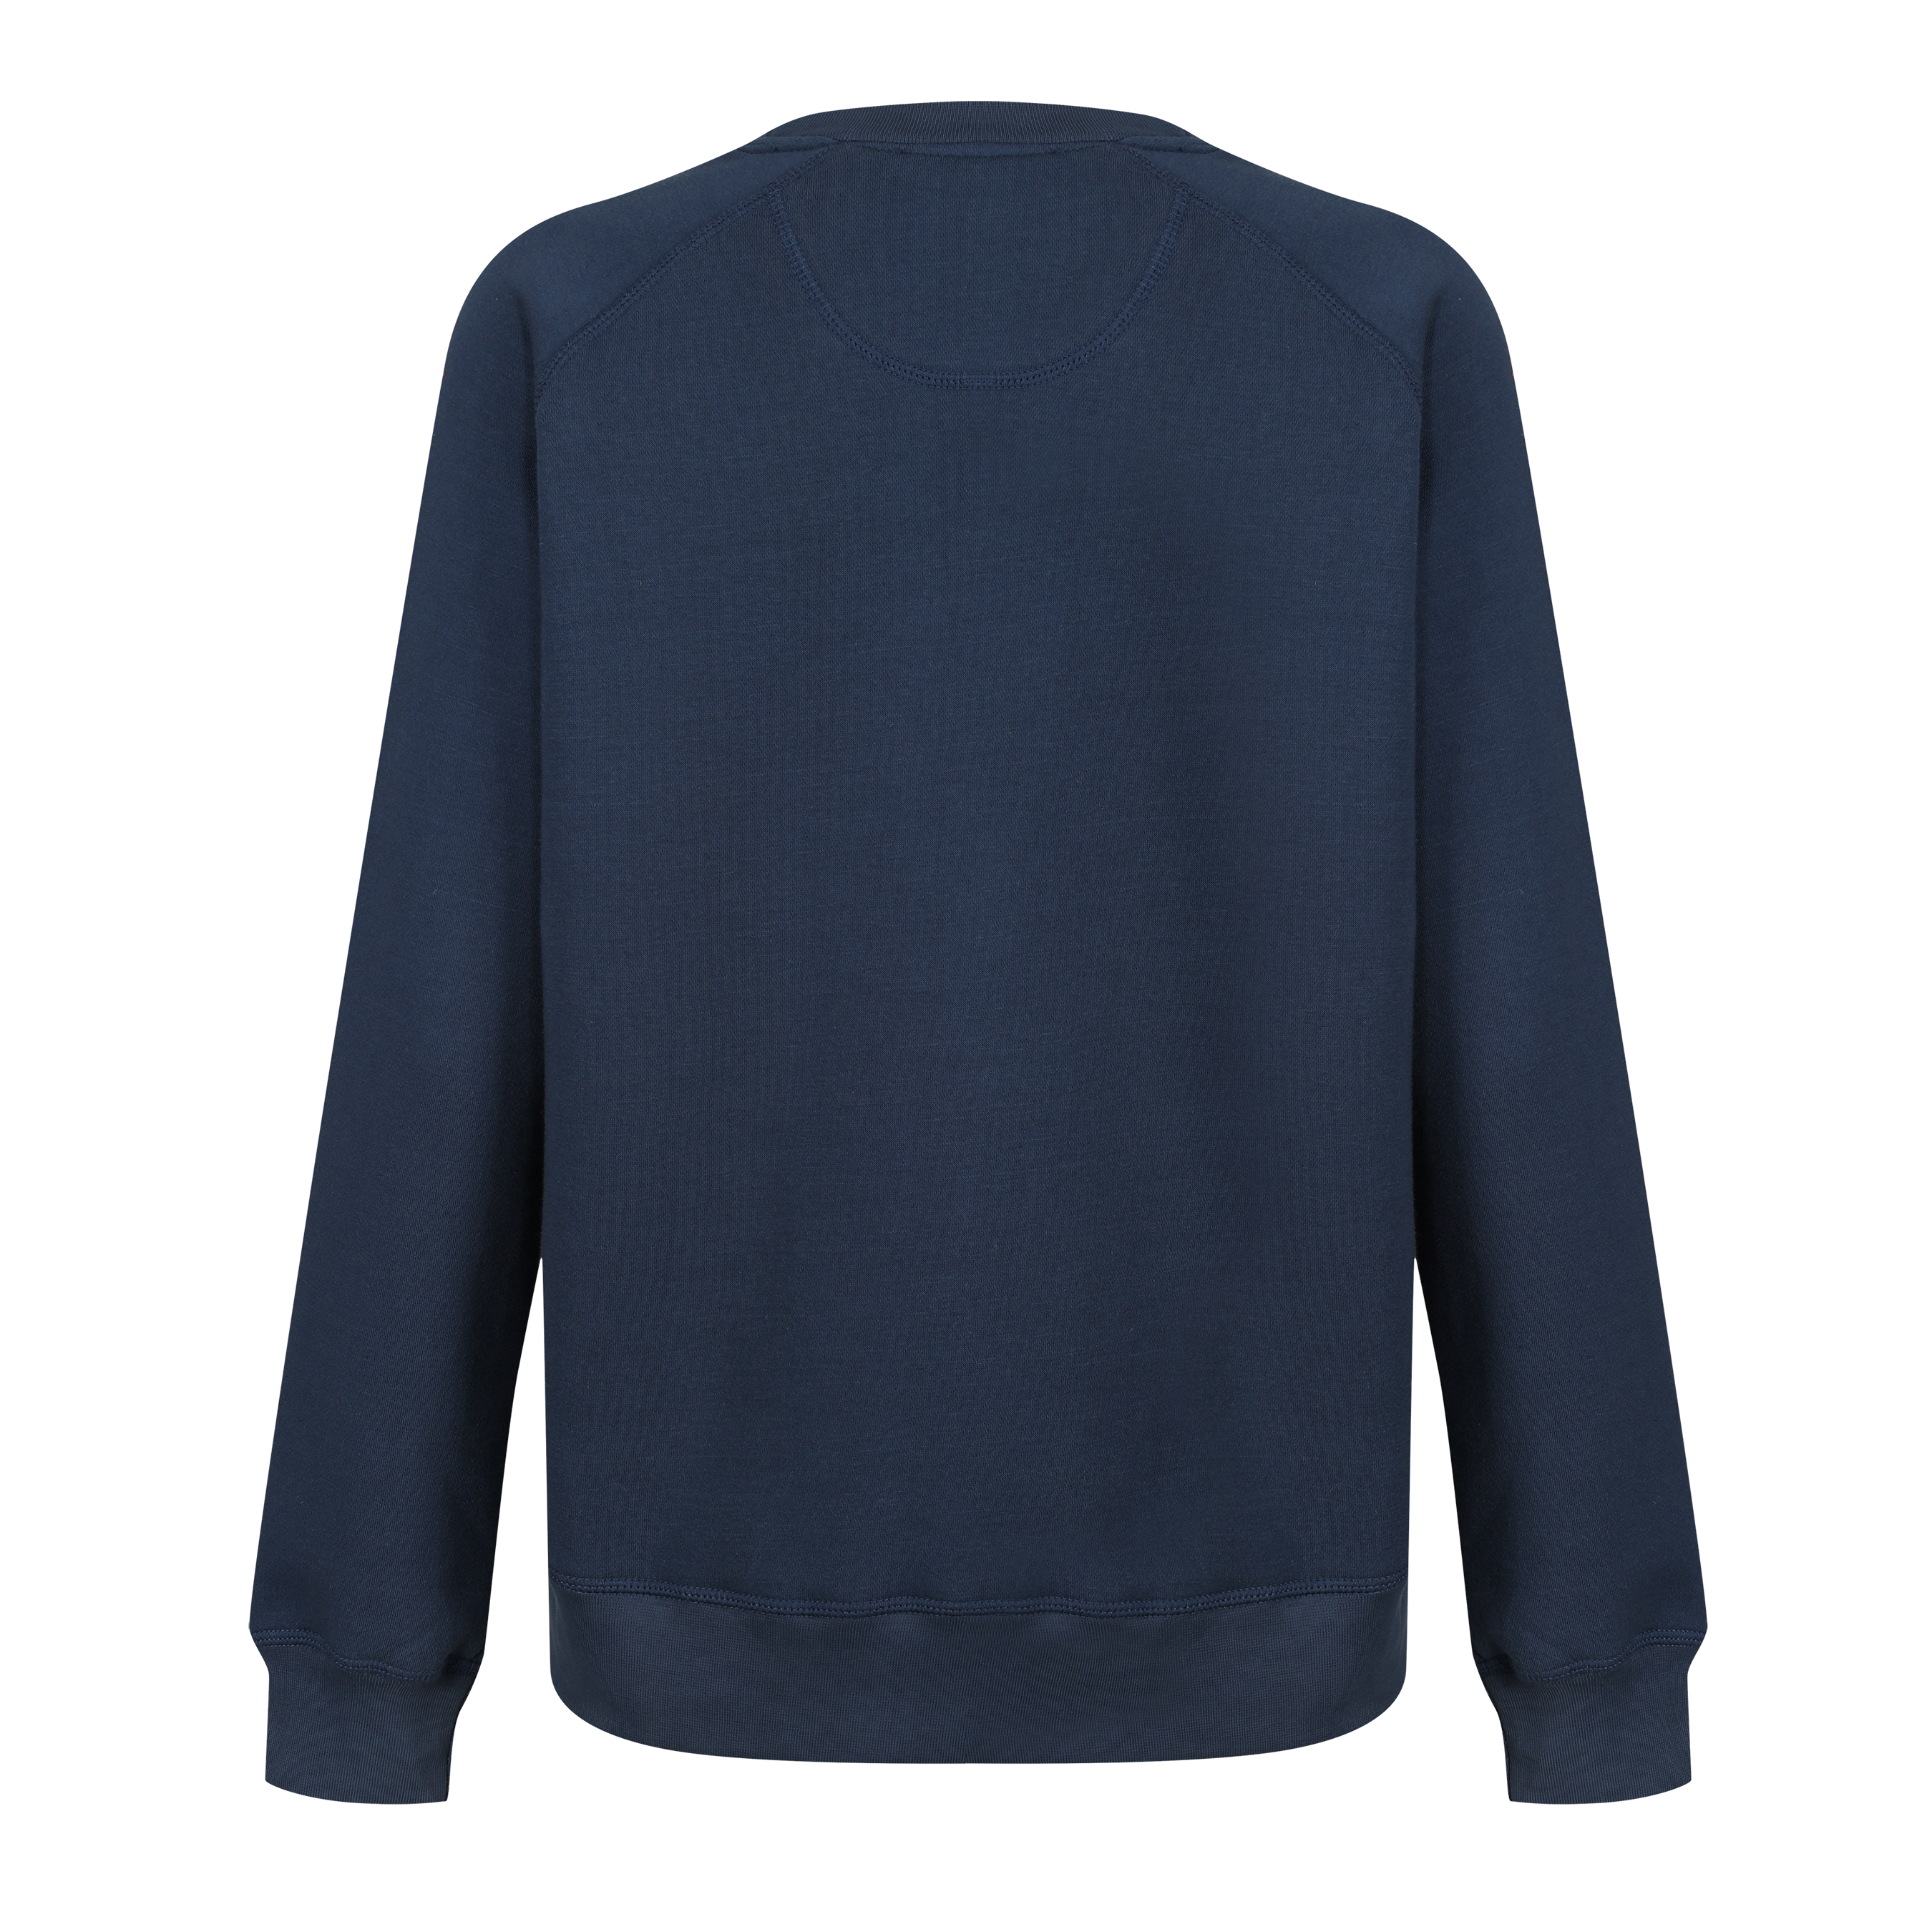 The back of a dark blue colour lady sweatshirt with Moto Girl 3D logo